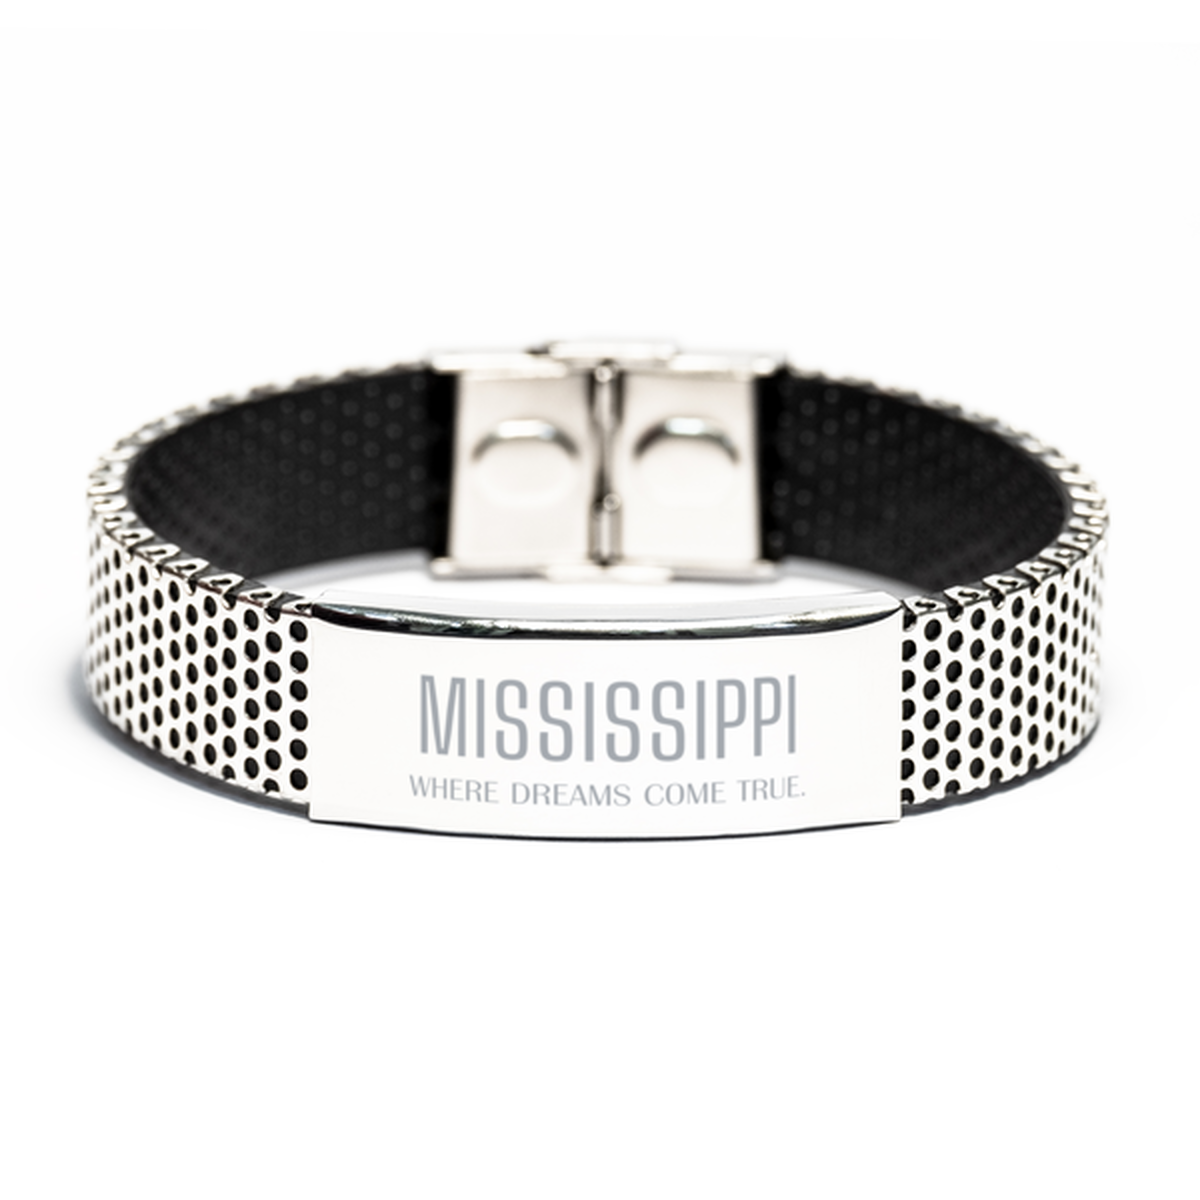 Love Mississippi State Stainless Steel Bracelet, Mississippi Where dreams come true, Birthday Inspirational Gifts For Mississippi Men, Women, Friends